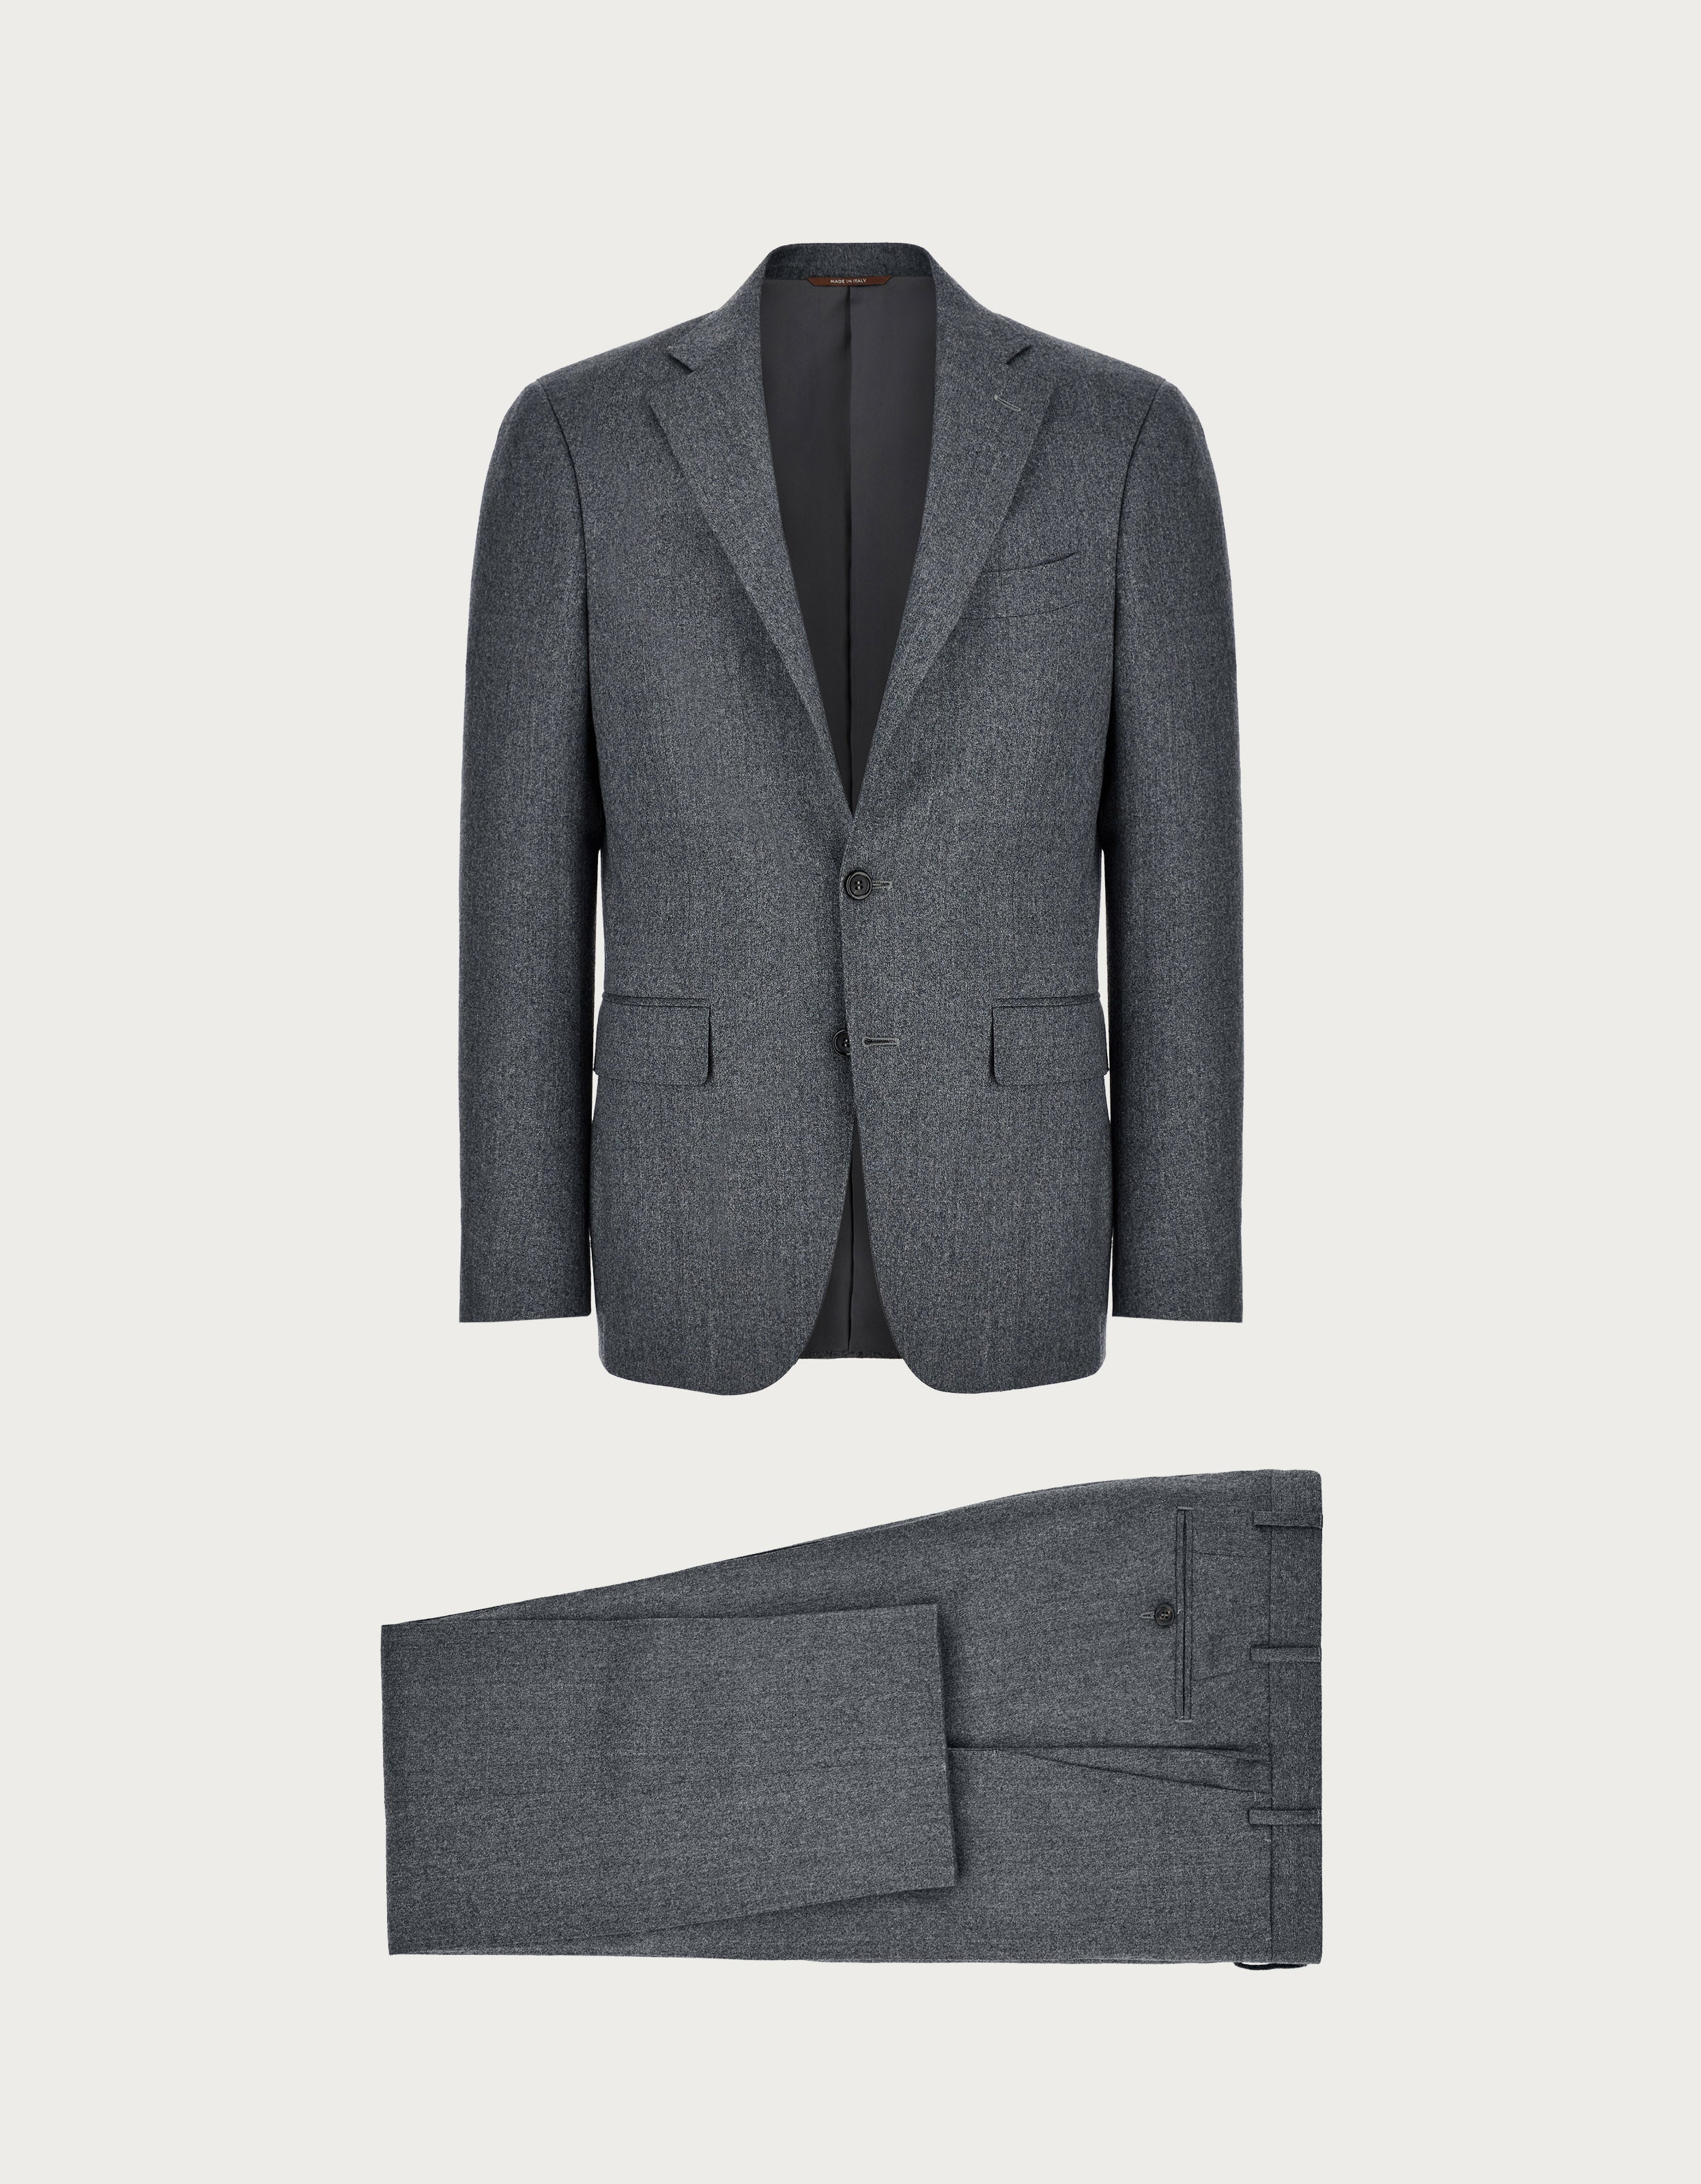 CANALI - Grey Flannel Impeccable Wool Modern Fit Suit 13280/31/7R-AR03472.201